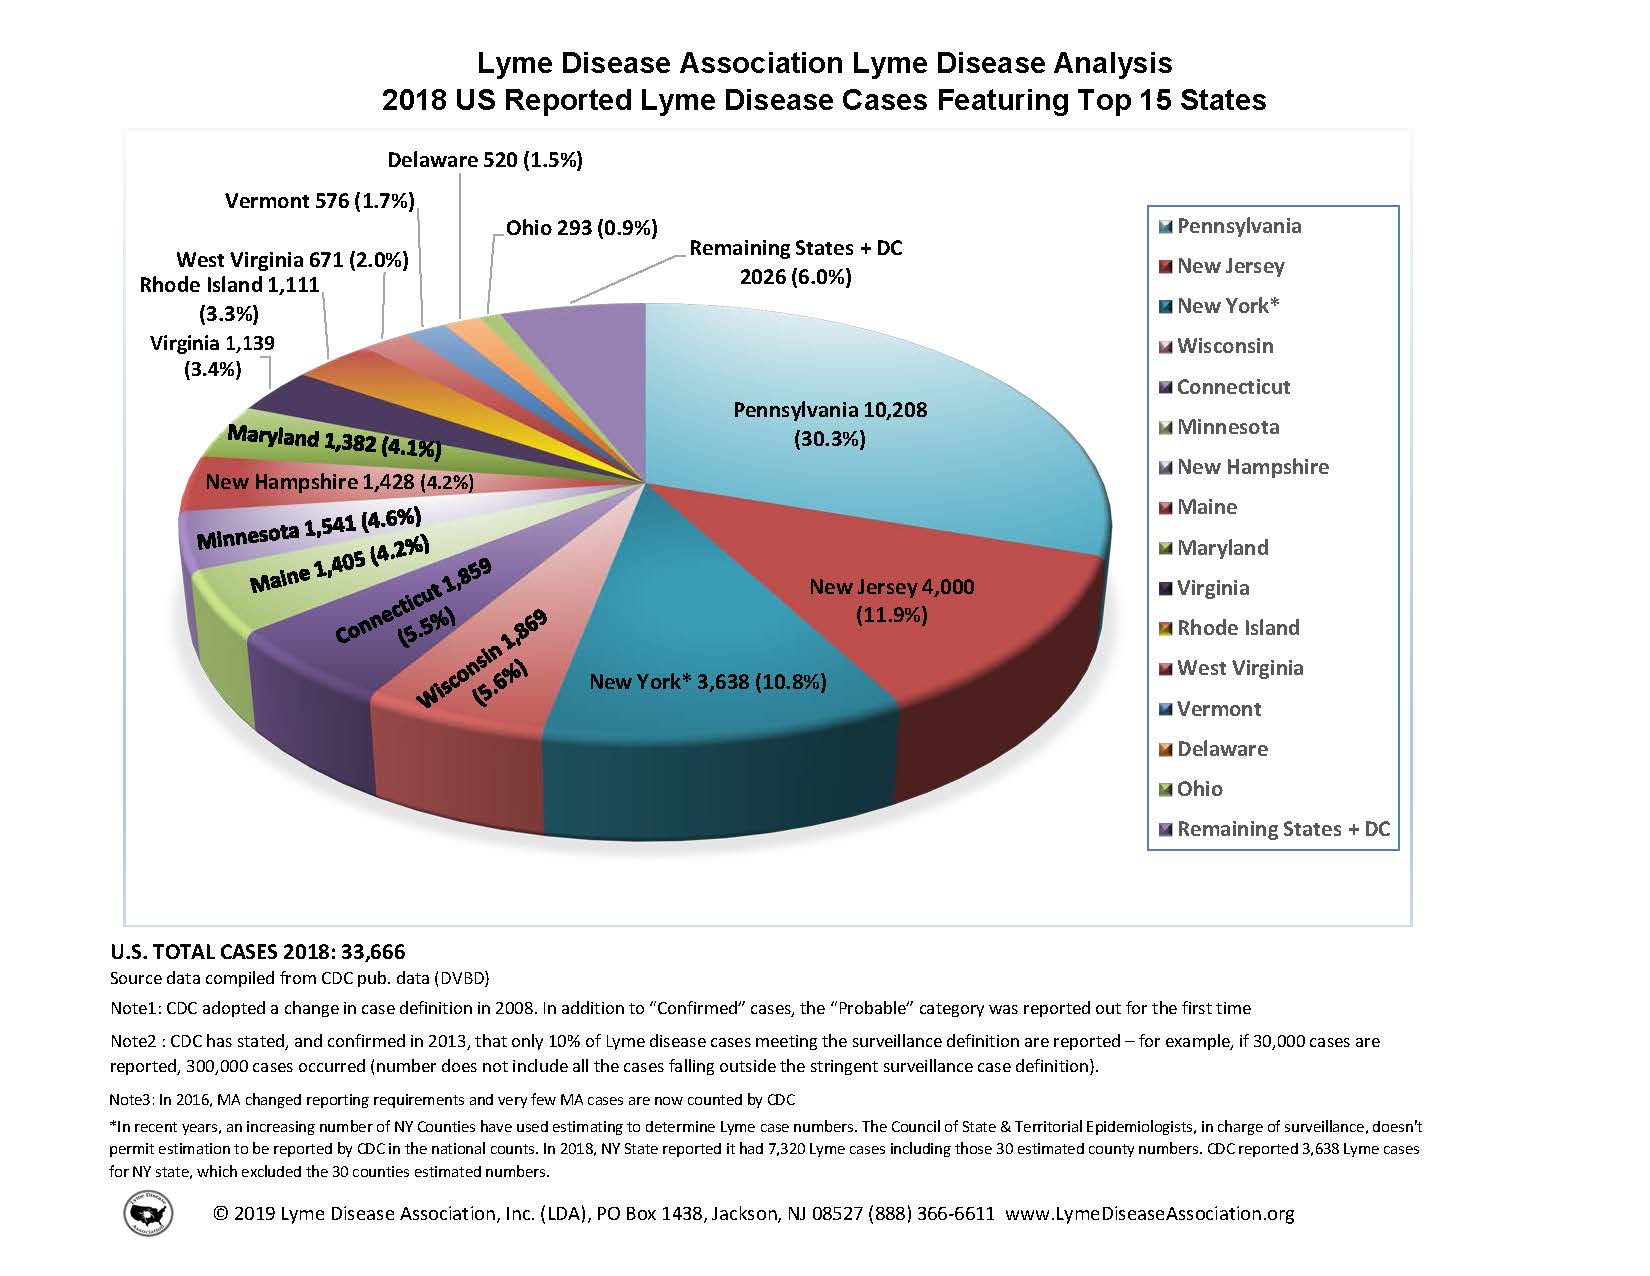 Bar chart of 2018 US reported lyme disease cases featuring top 15 states